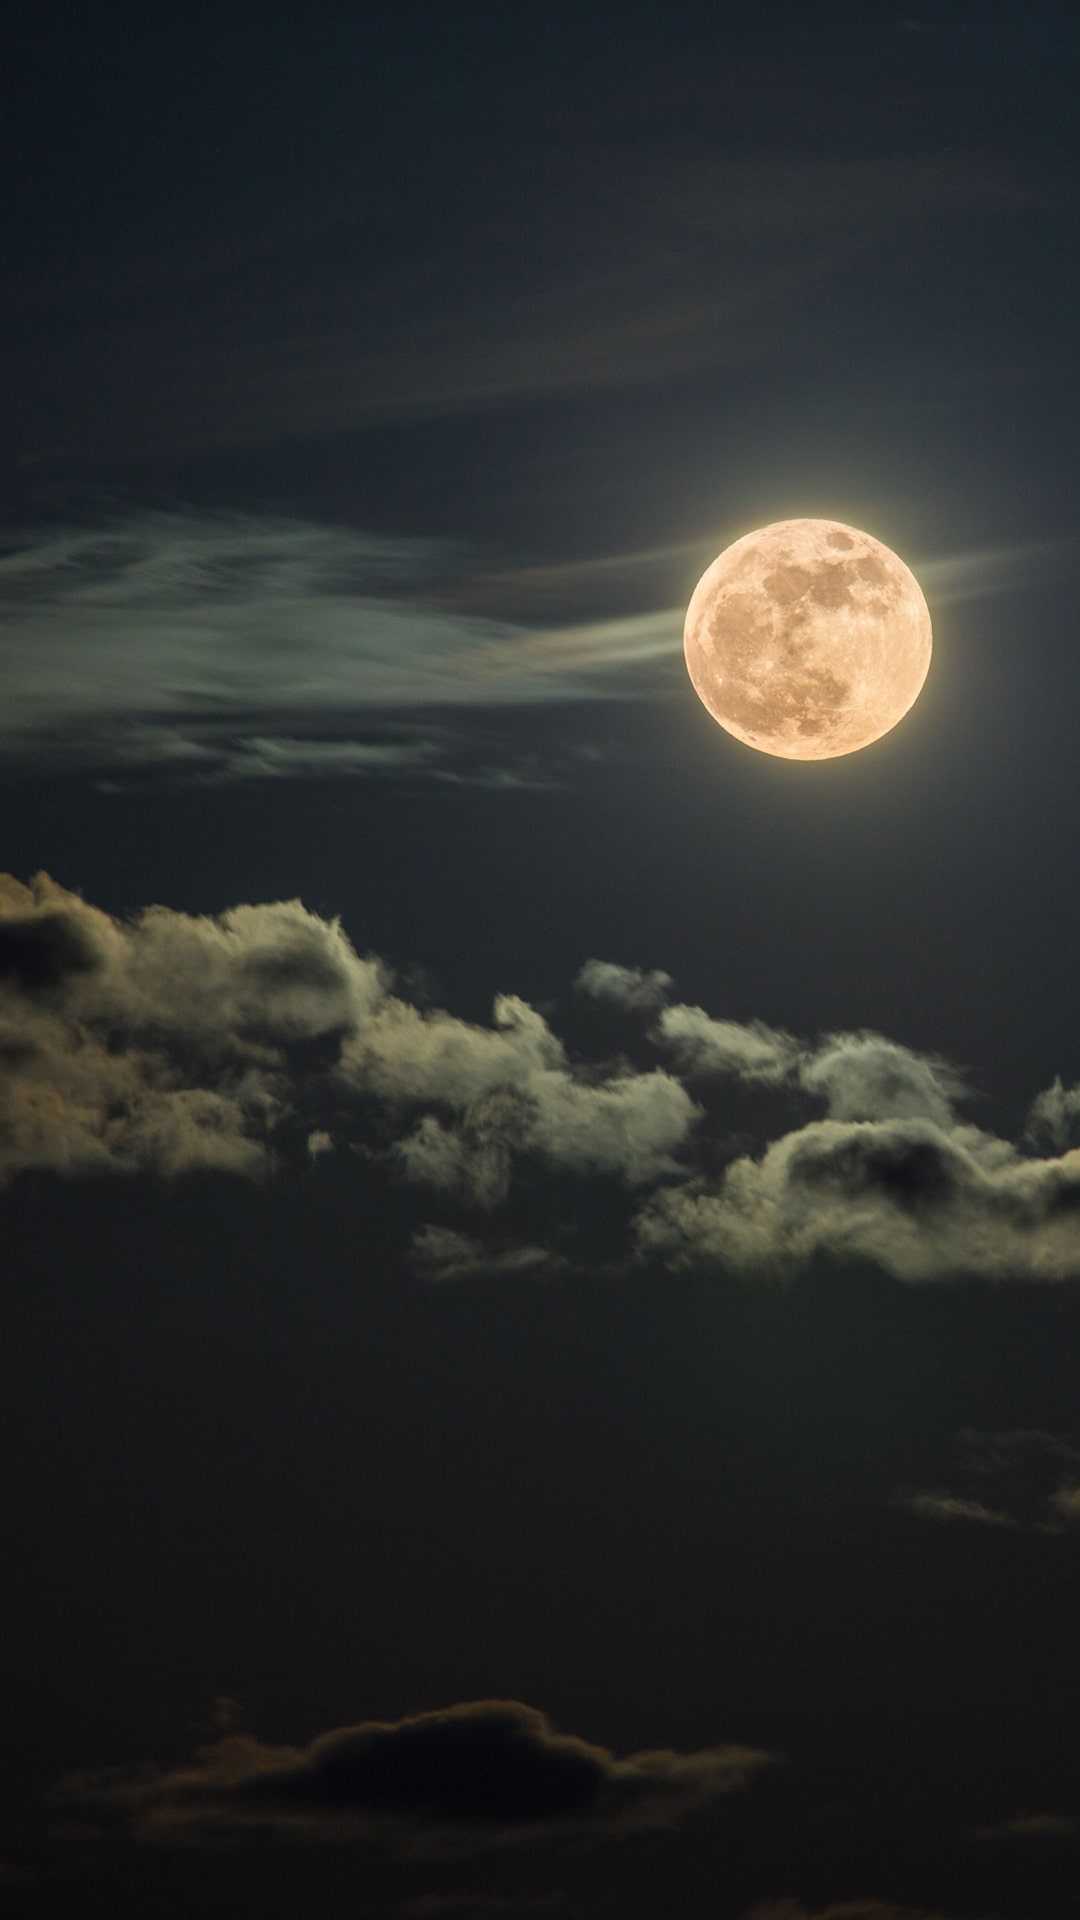 IPhone wallpaper of the full moon with clouds in the night sky. - Moon